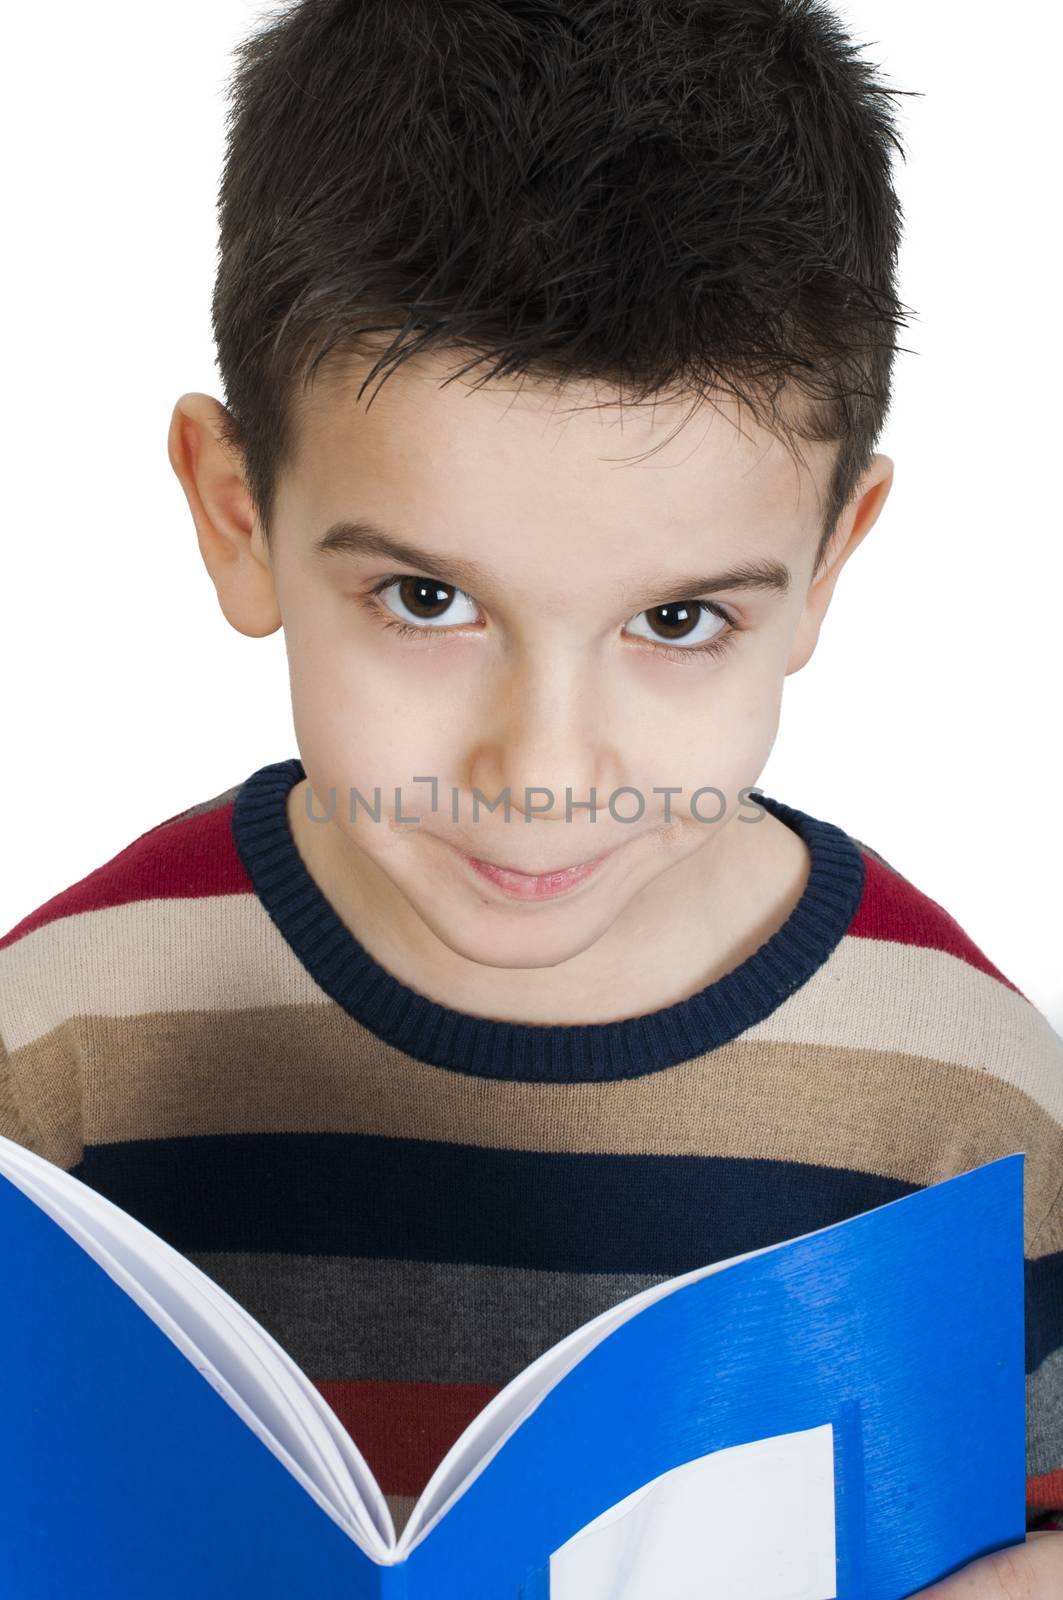 Child with notebook in front of the face. White isolated